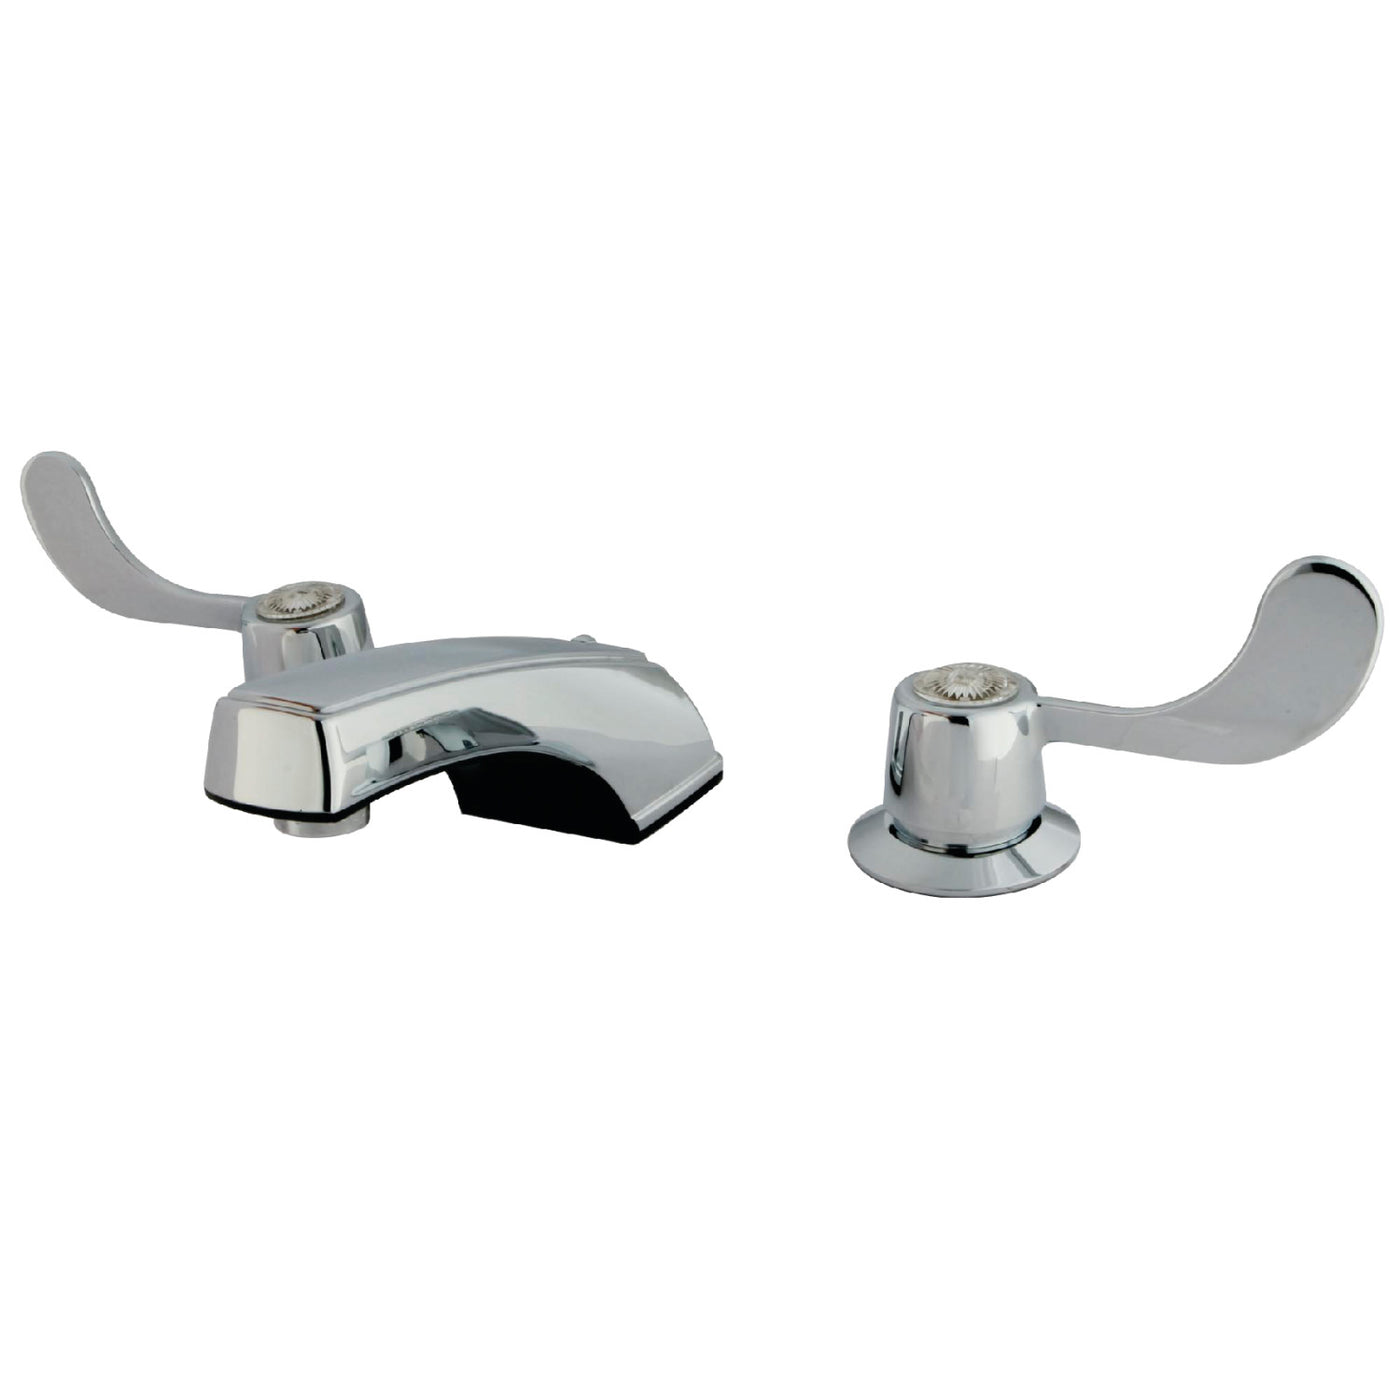 Elements of Design EB931G Widespread Bathroom Faucet with Grid Strainer, Polished Chrome